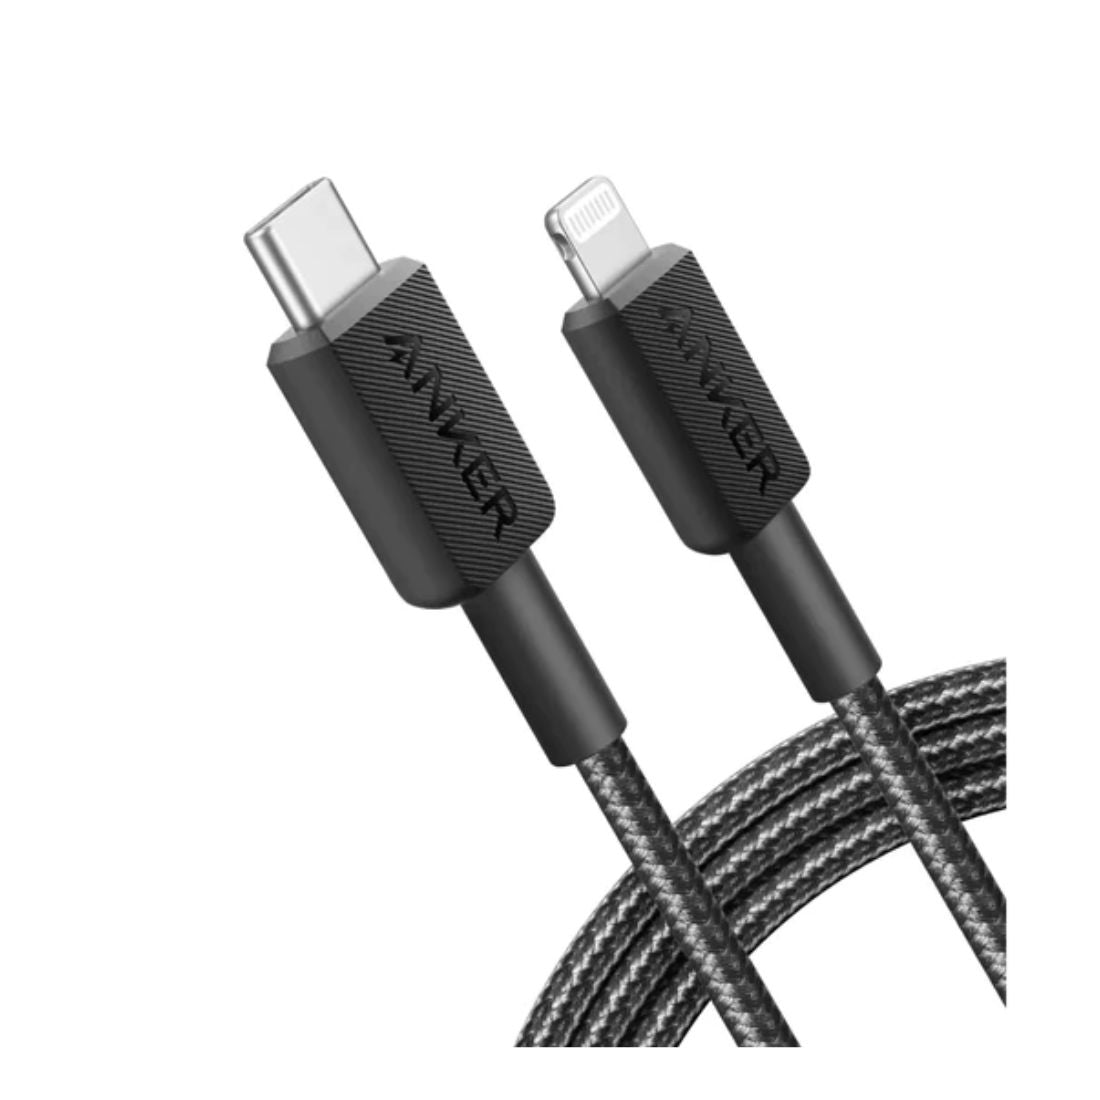 Anker 322 USB-C to Lightning Cable Braided (1.8m/6ft) A81B6H11 - Black